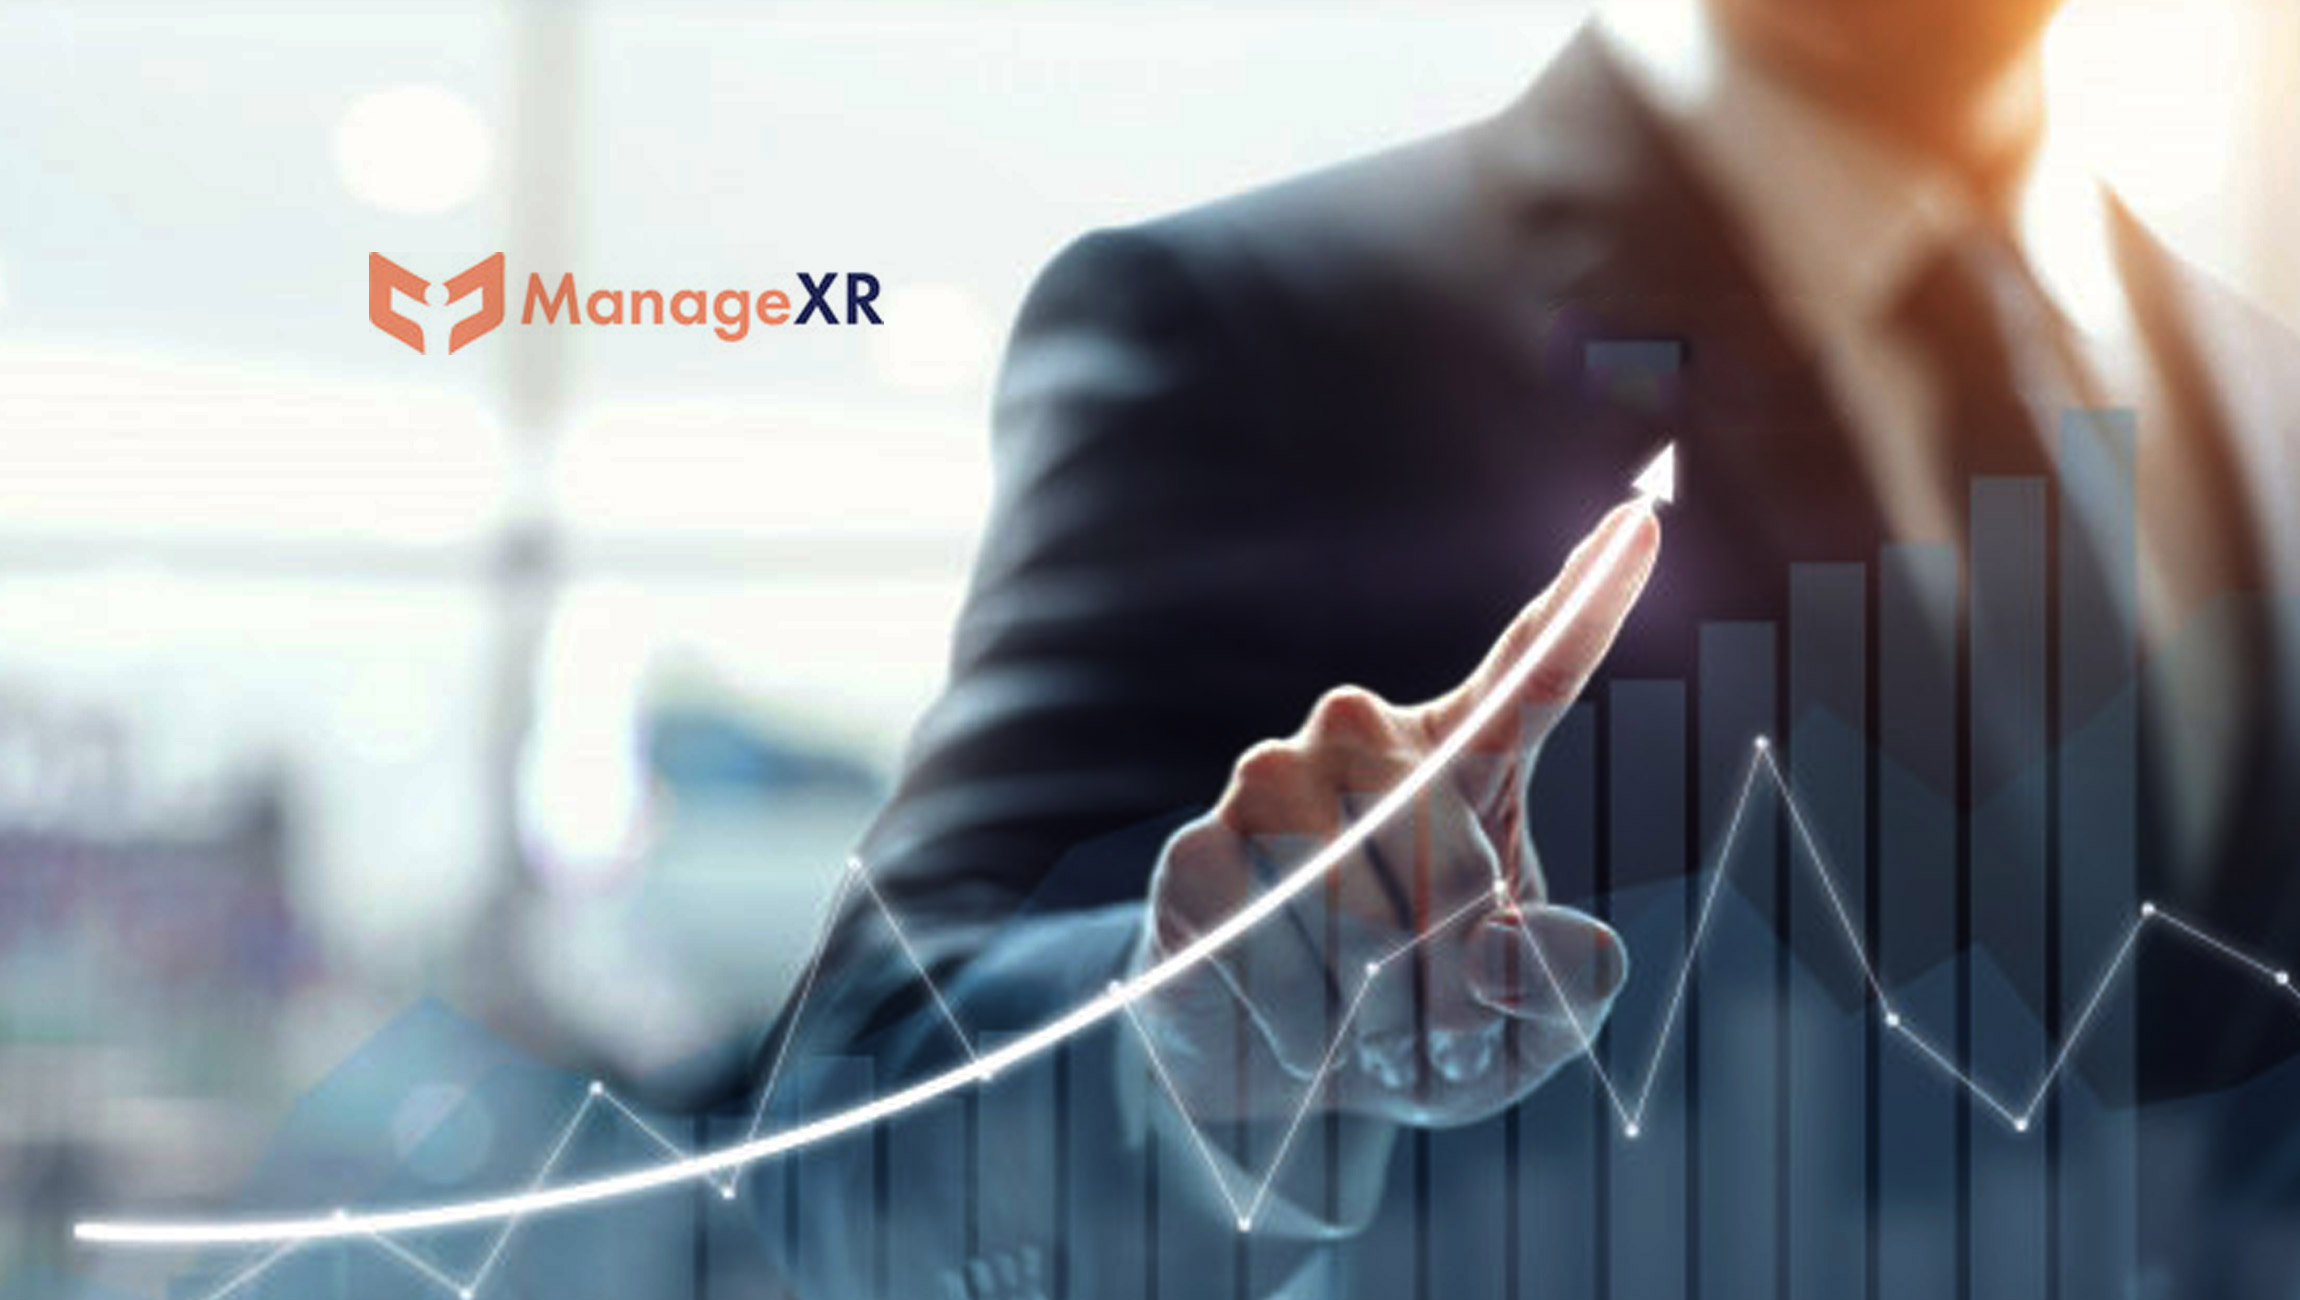 ManageXR-Raises-_4-Million-Seed-Round-to-Scale-XR-for-Business